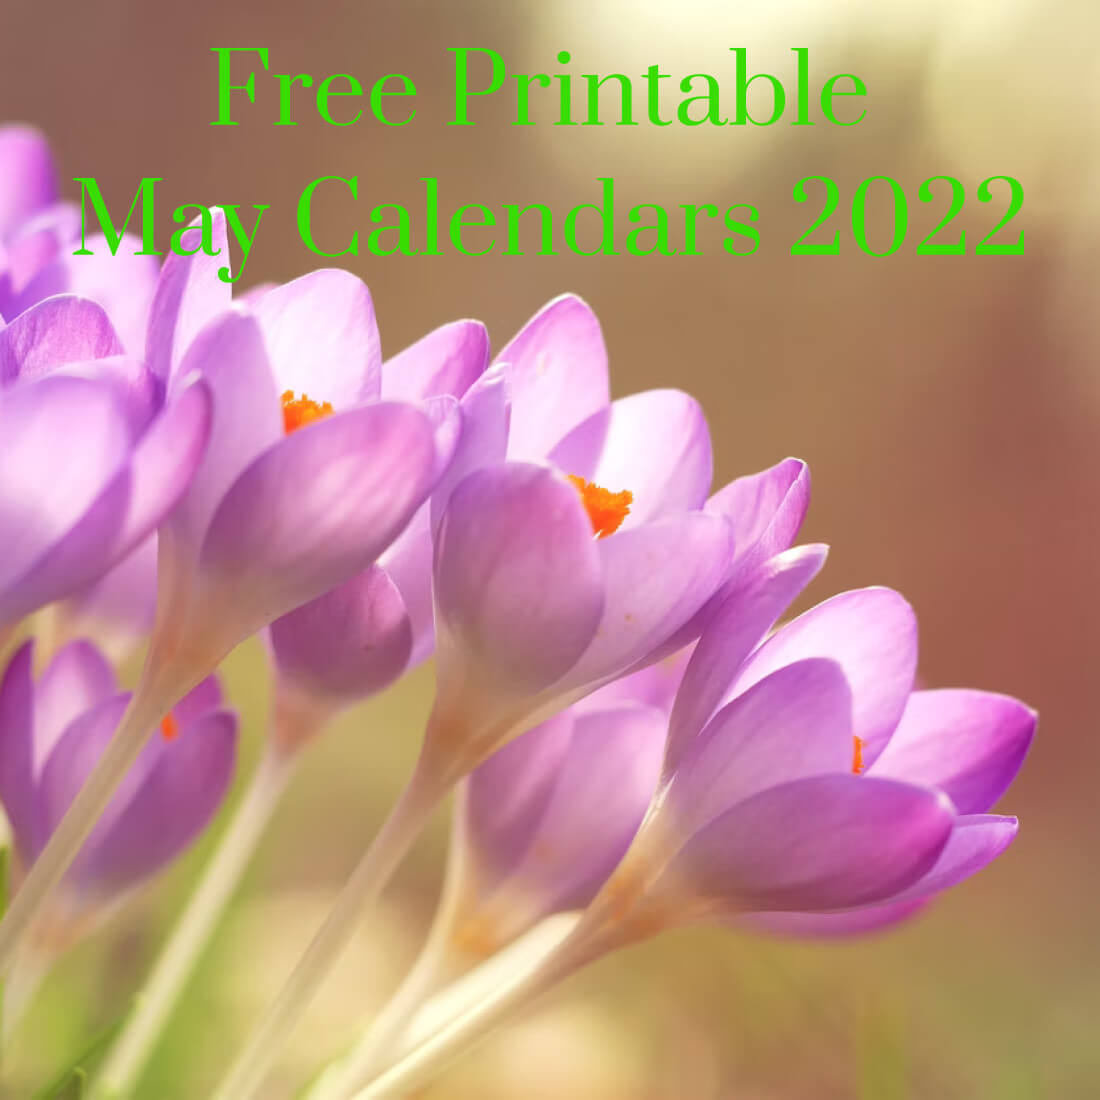 02 preview free printable may calendars 2022 1100x1100 1